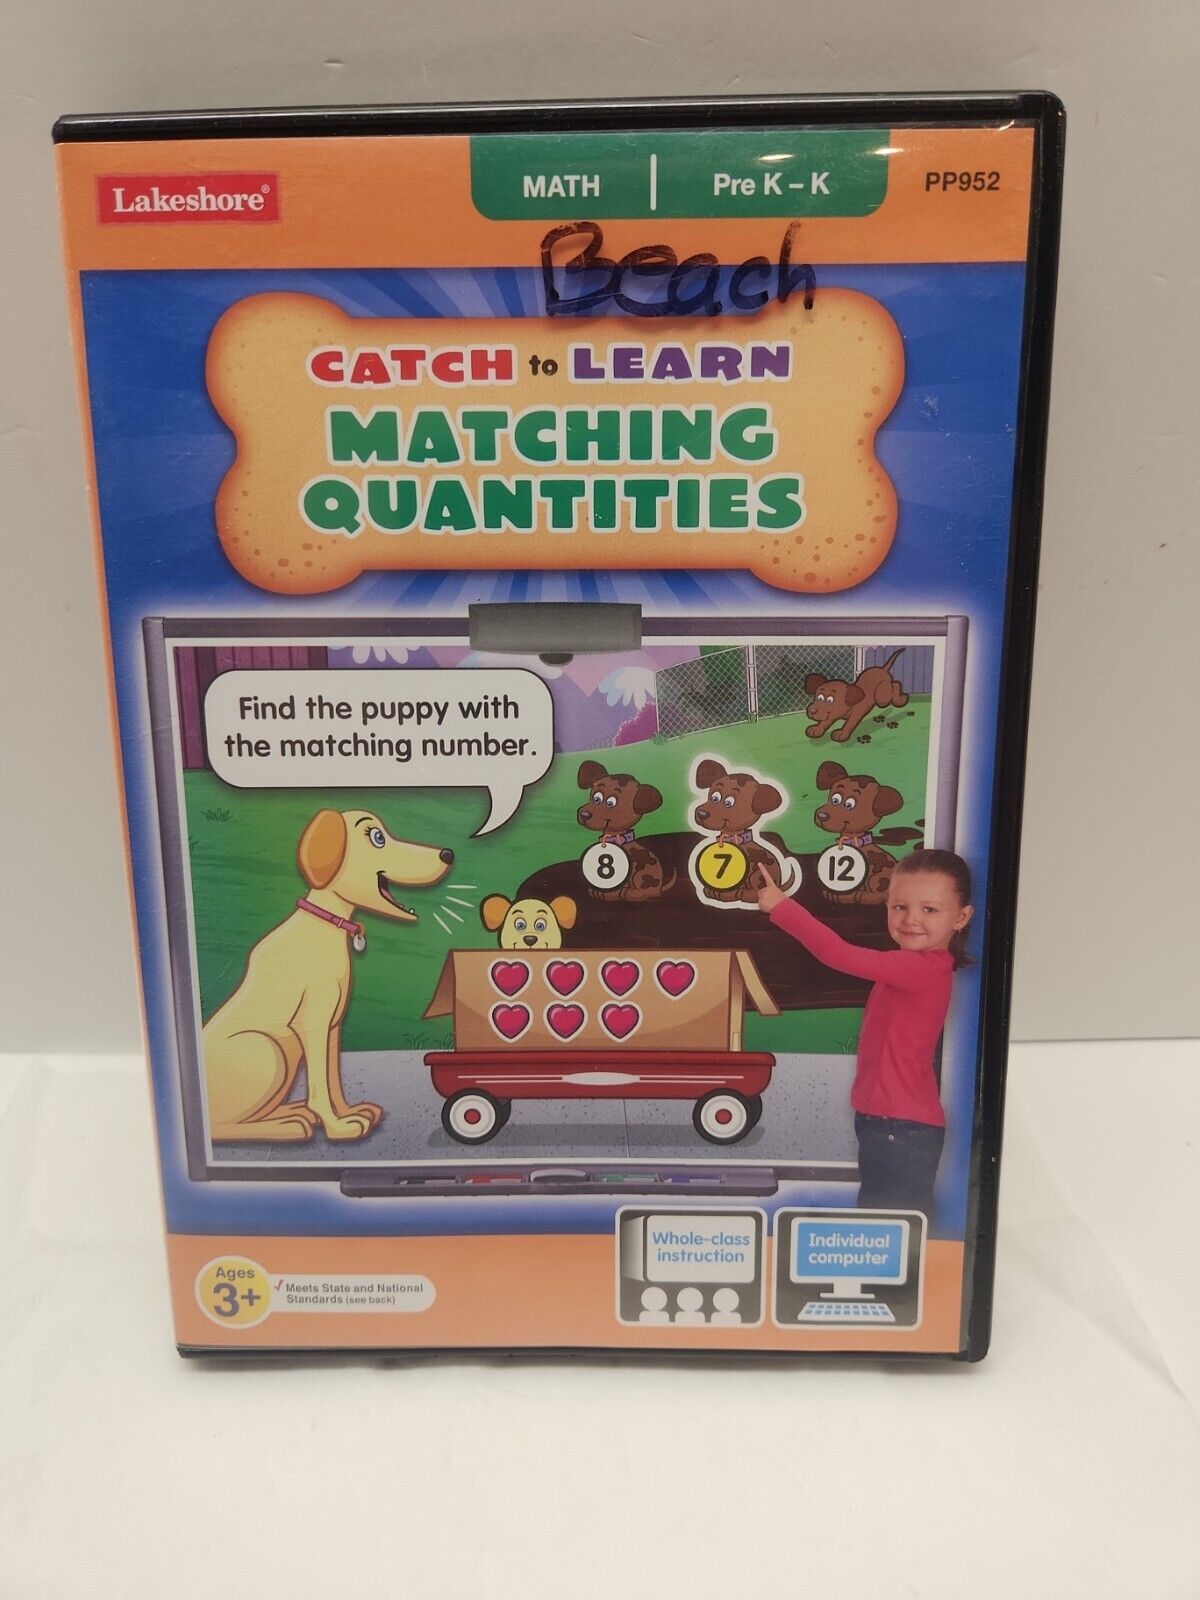 Catch to Learn - Matching Quantities [PC Software, Lakeshore]